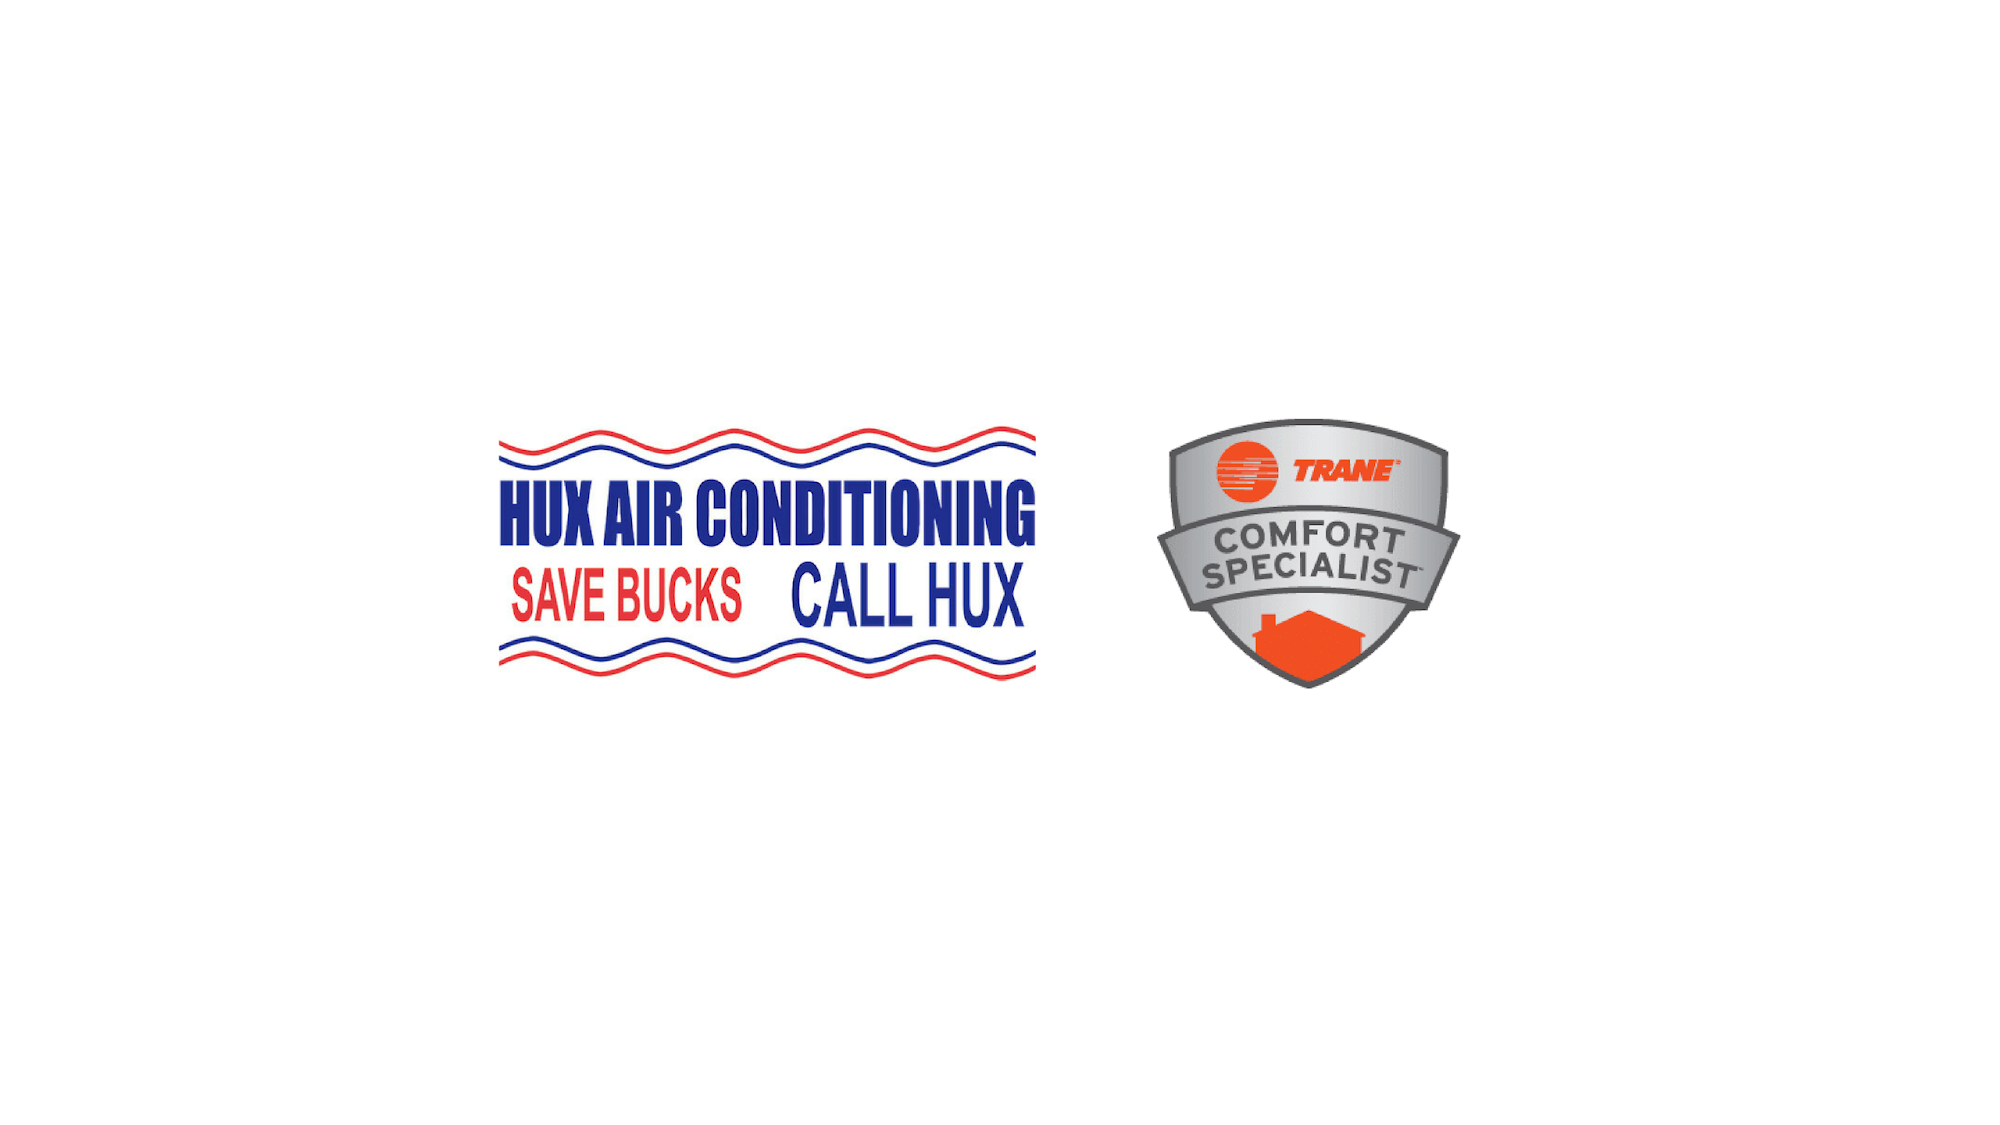 Hux Air Conditioning 127 Hux Hill Dr, Mendenhall Mississippi 39114